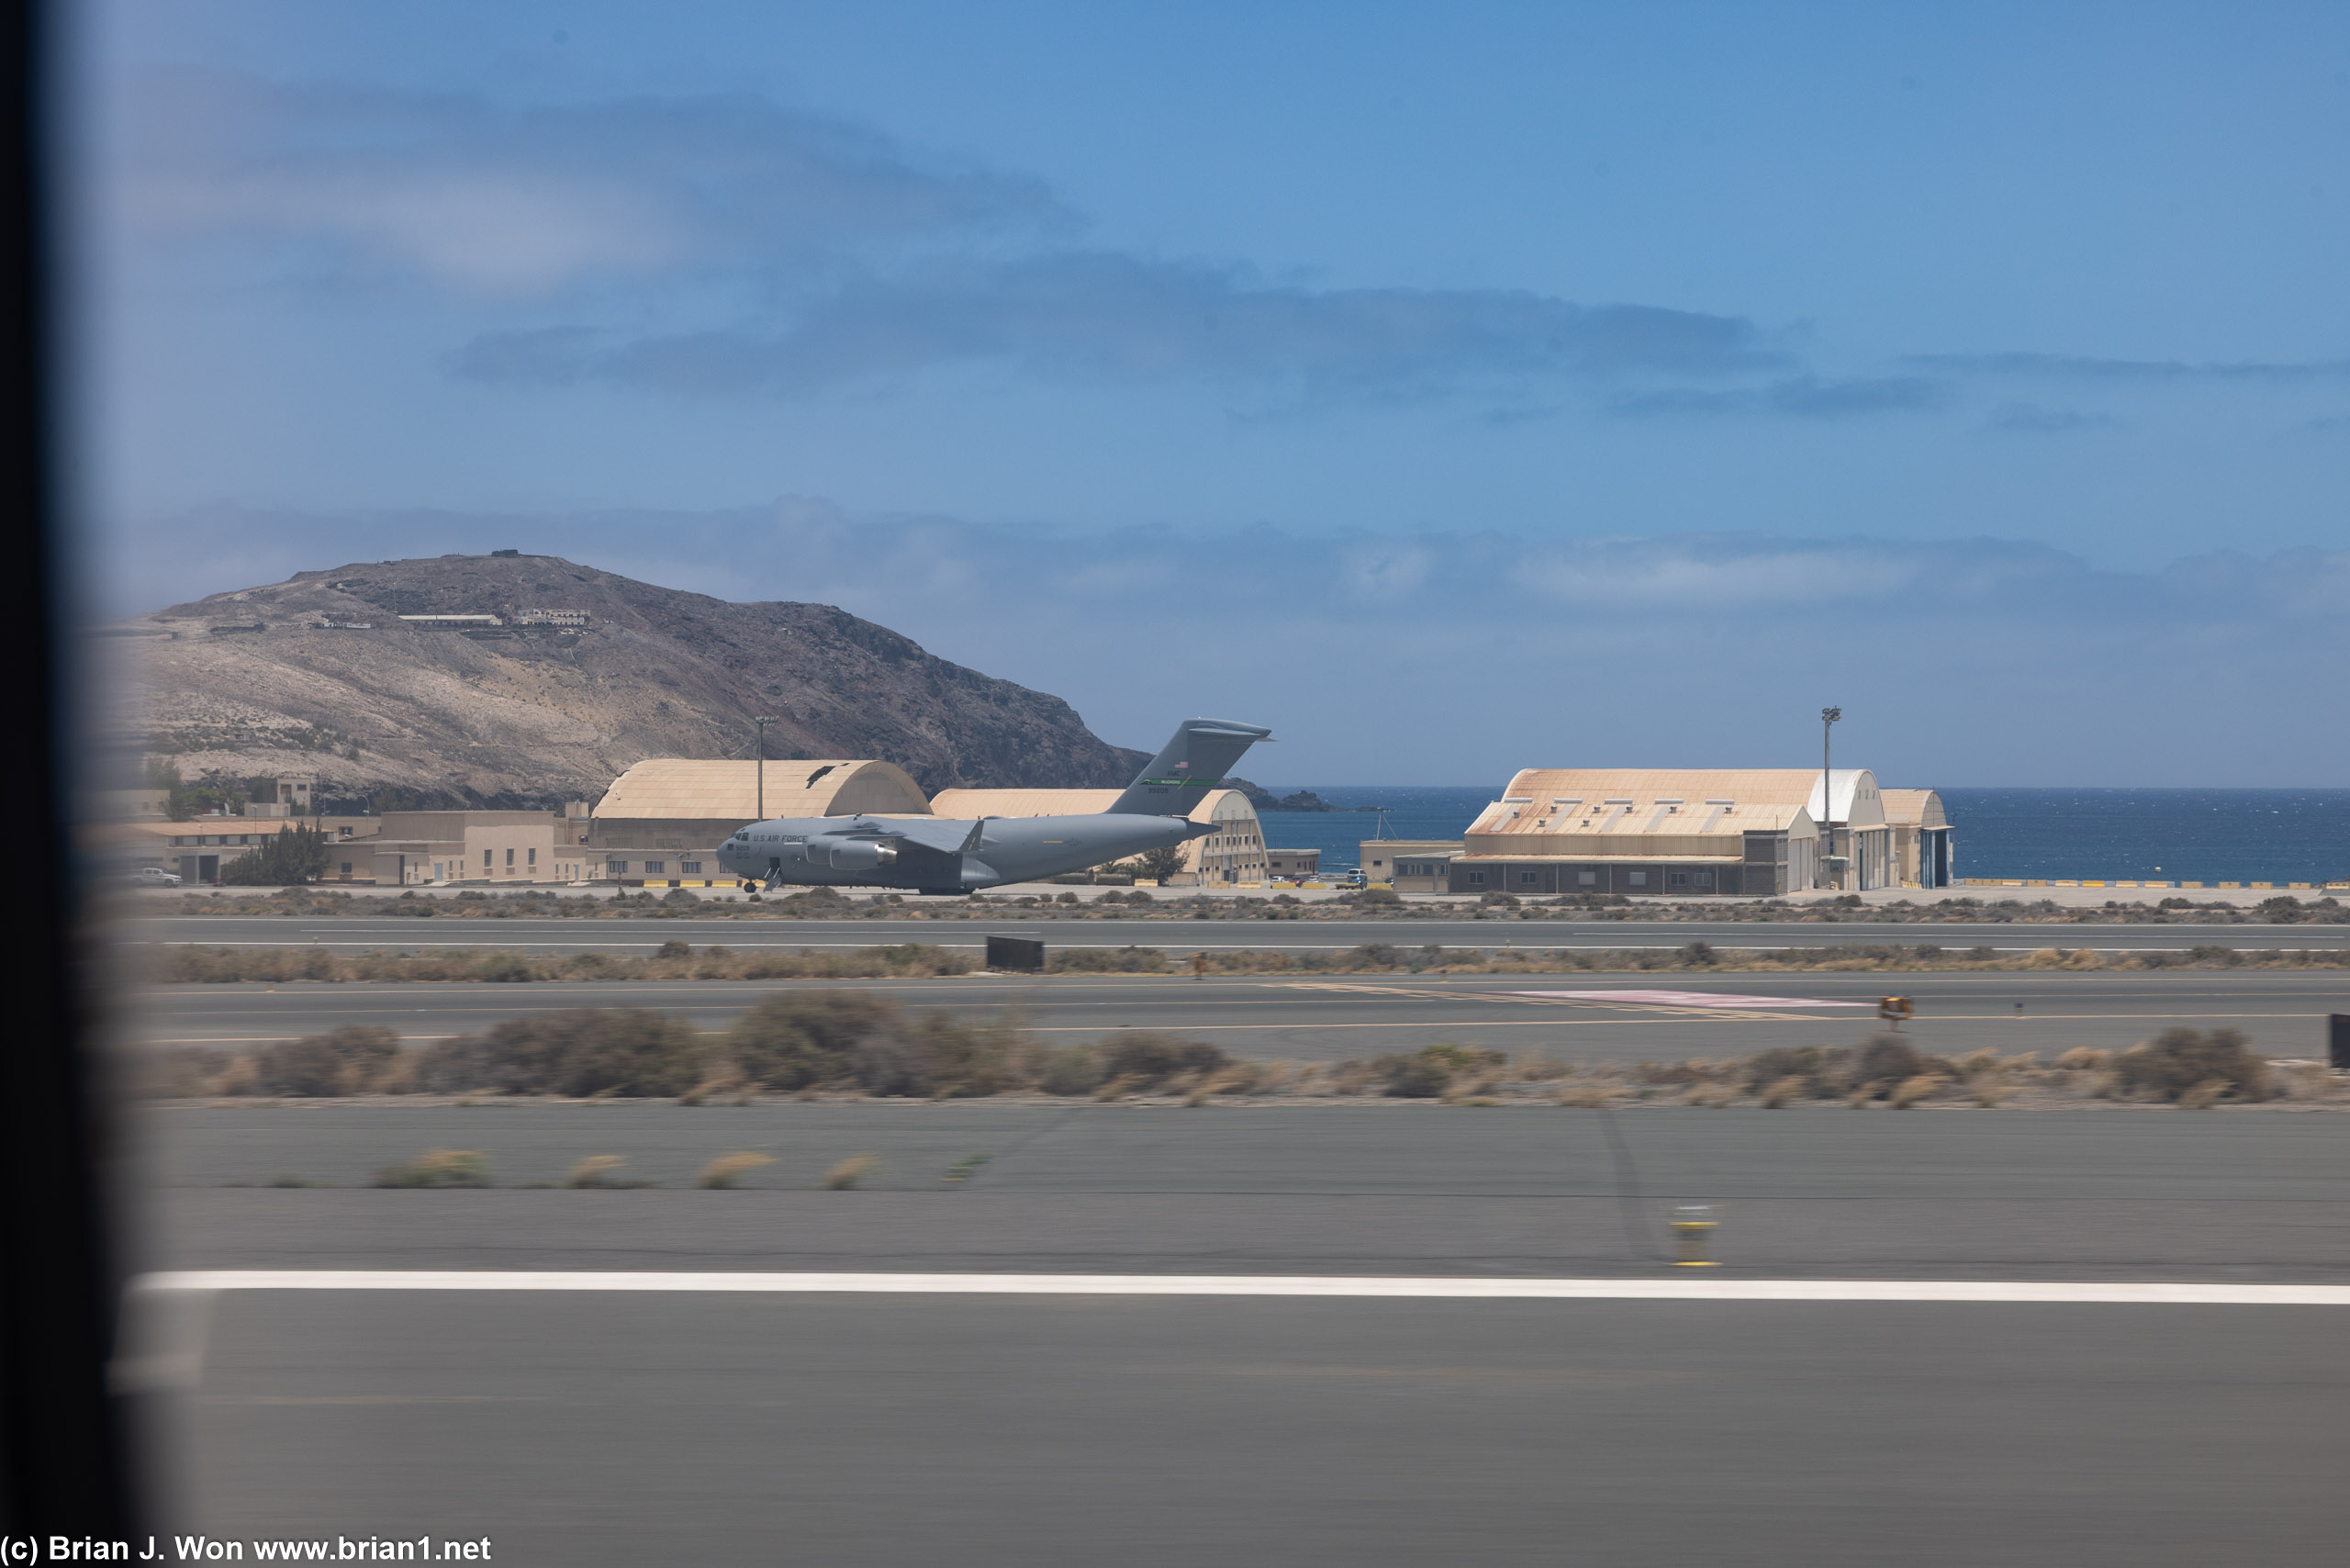 United States Air Force C-17 Globemaster III on the ramp at Gran Canaria Airport.